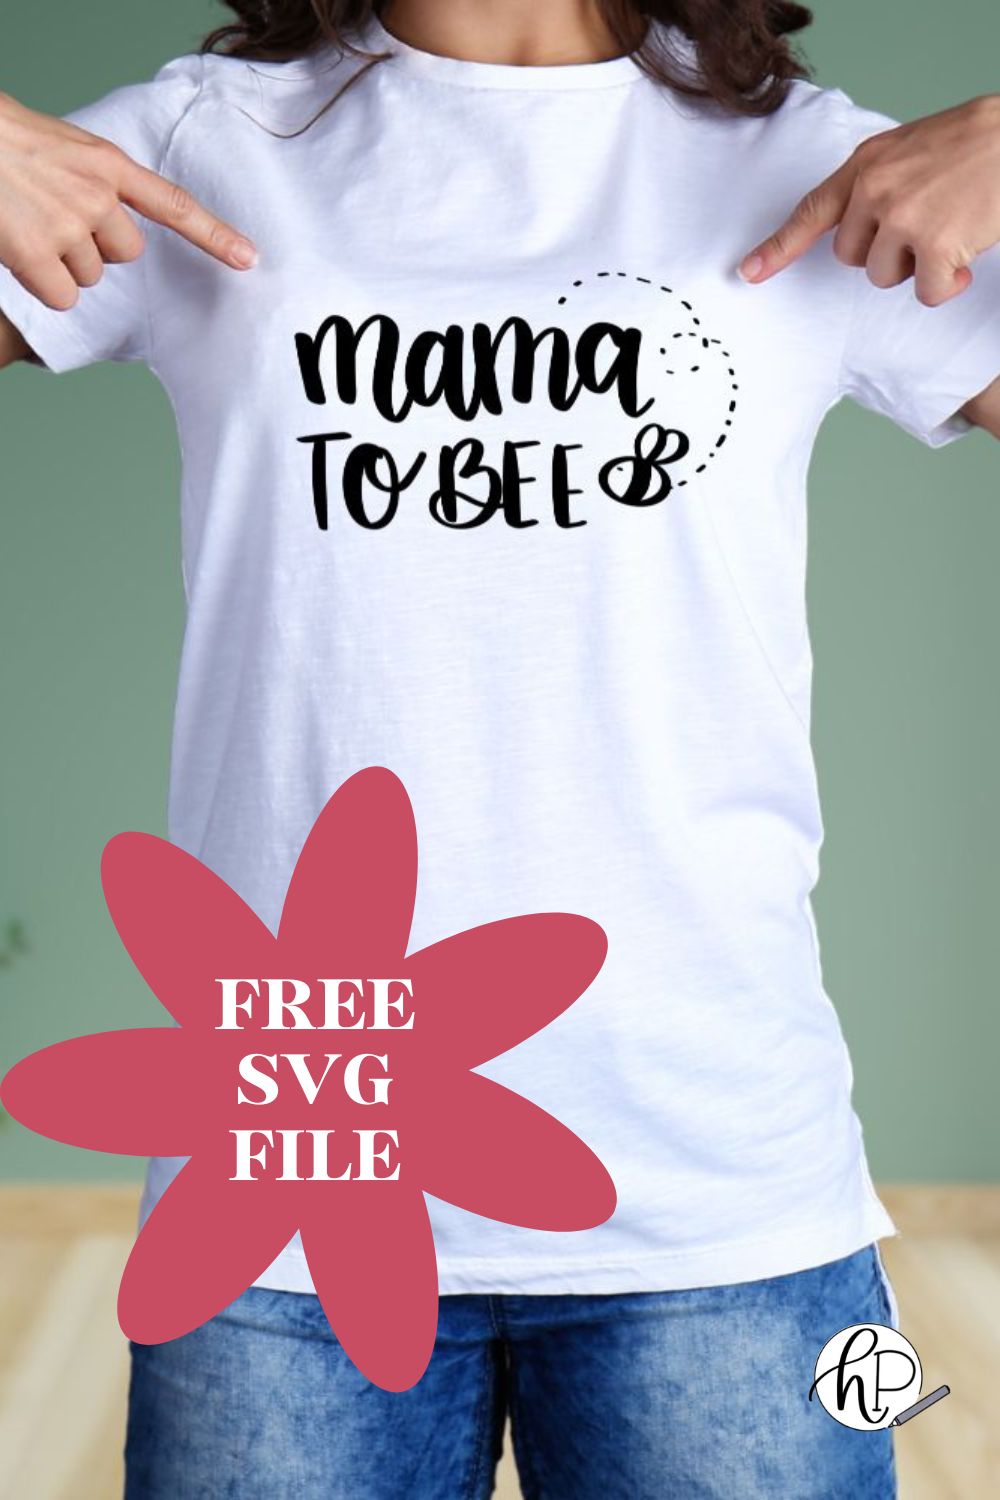 Mama to bee SVG file shown on a t-shirt, text overlay reads 'free SVG file'